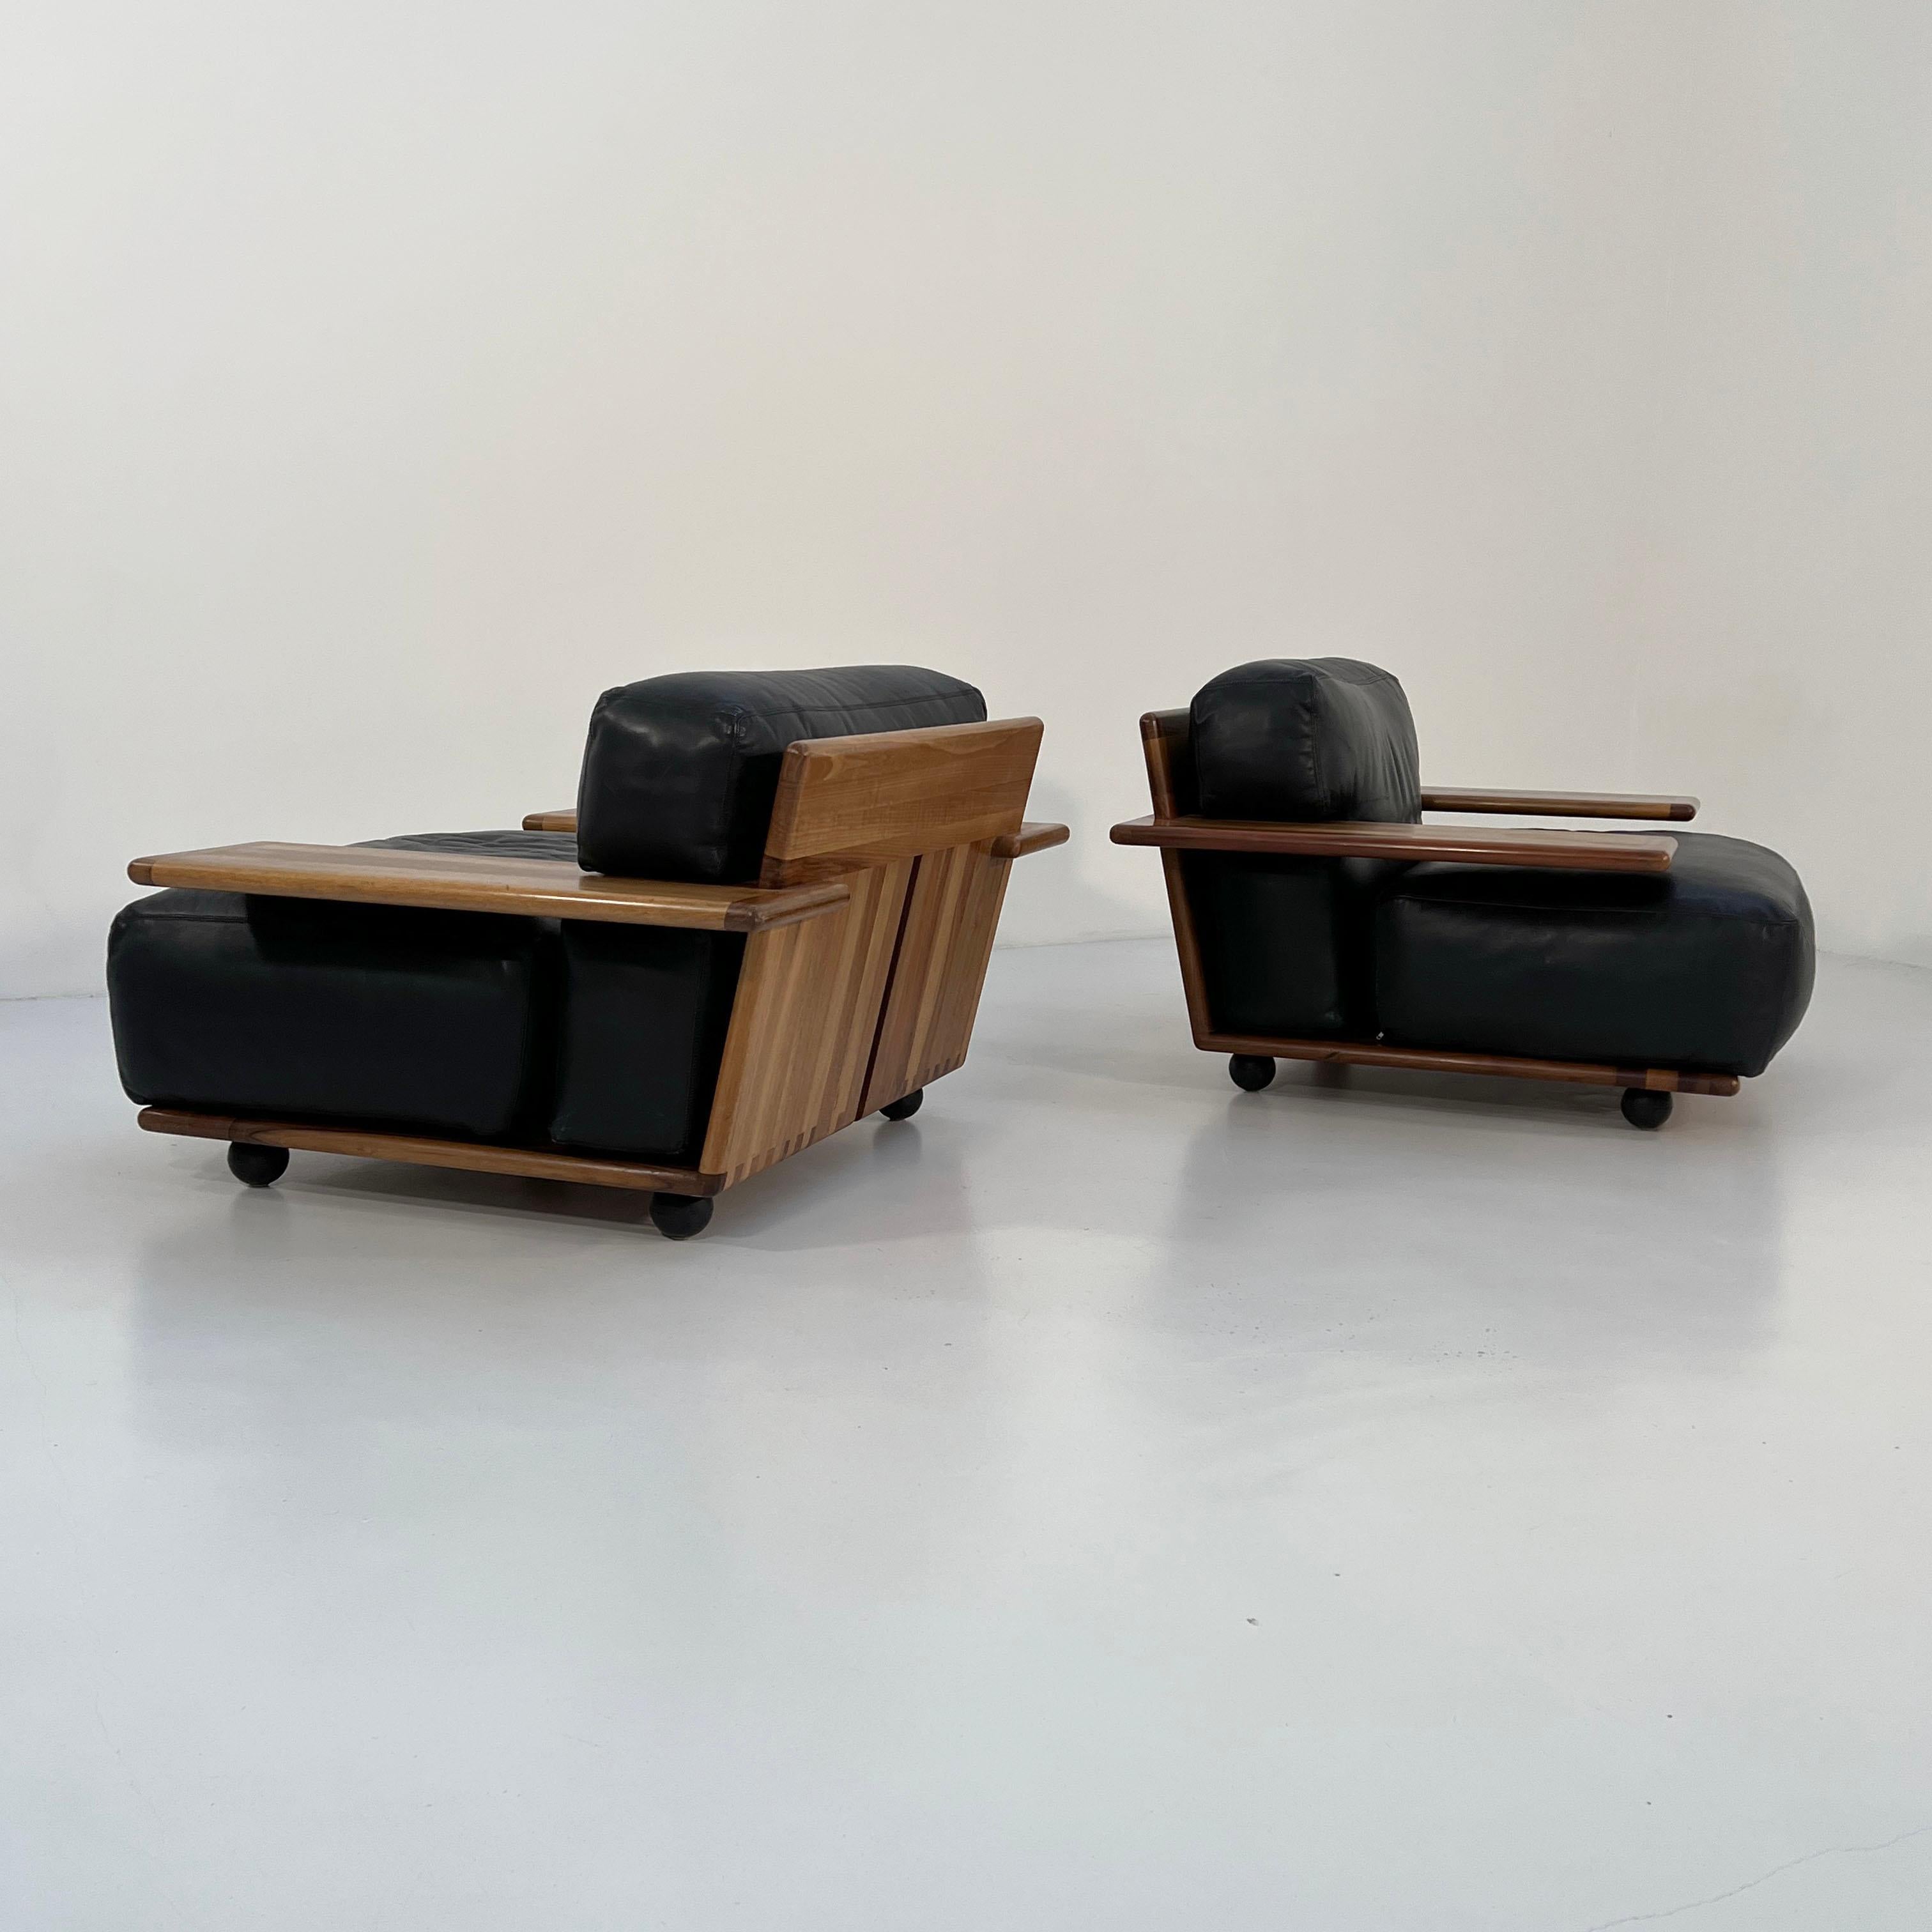 Pianura Armchair in Black Leather by Mario Bellini for Cassina, 1970s For Sale 8